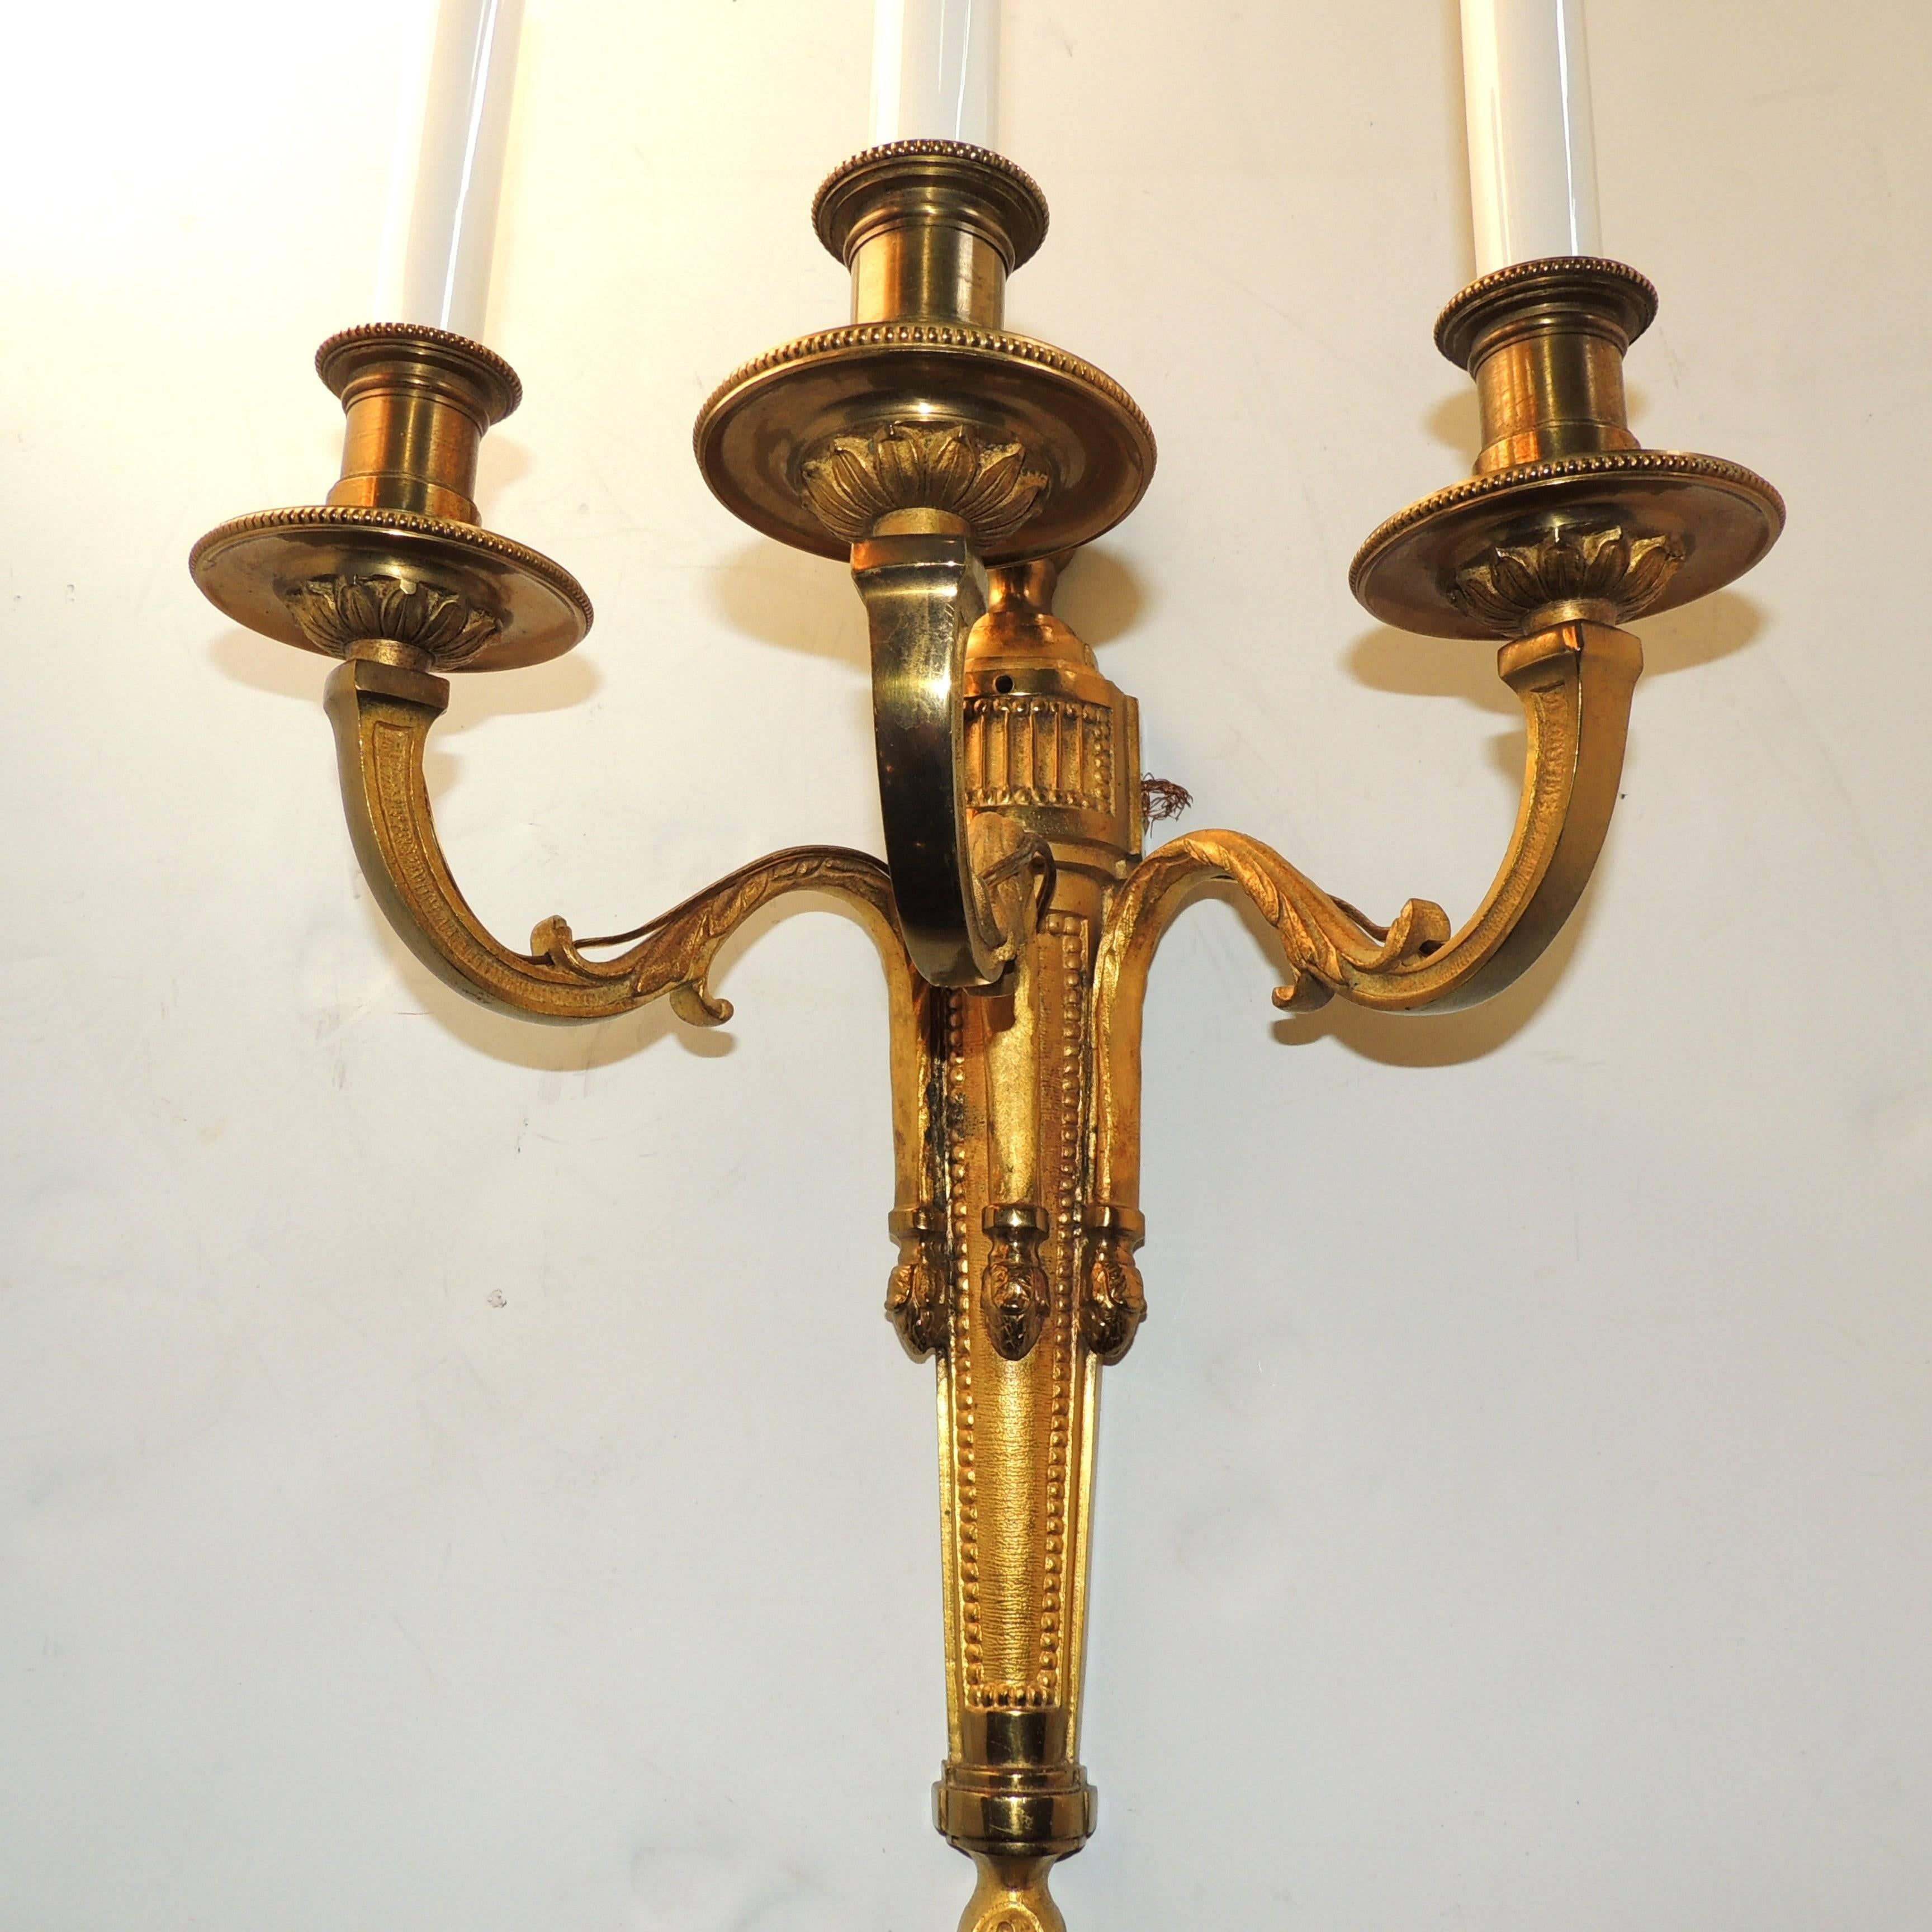 French Wonderful Pair Neoclassical Urn Three-Arm Regency Caldwell Empire Sconces For Sale